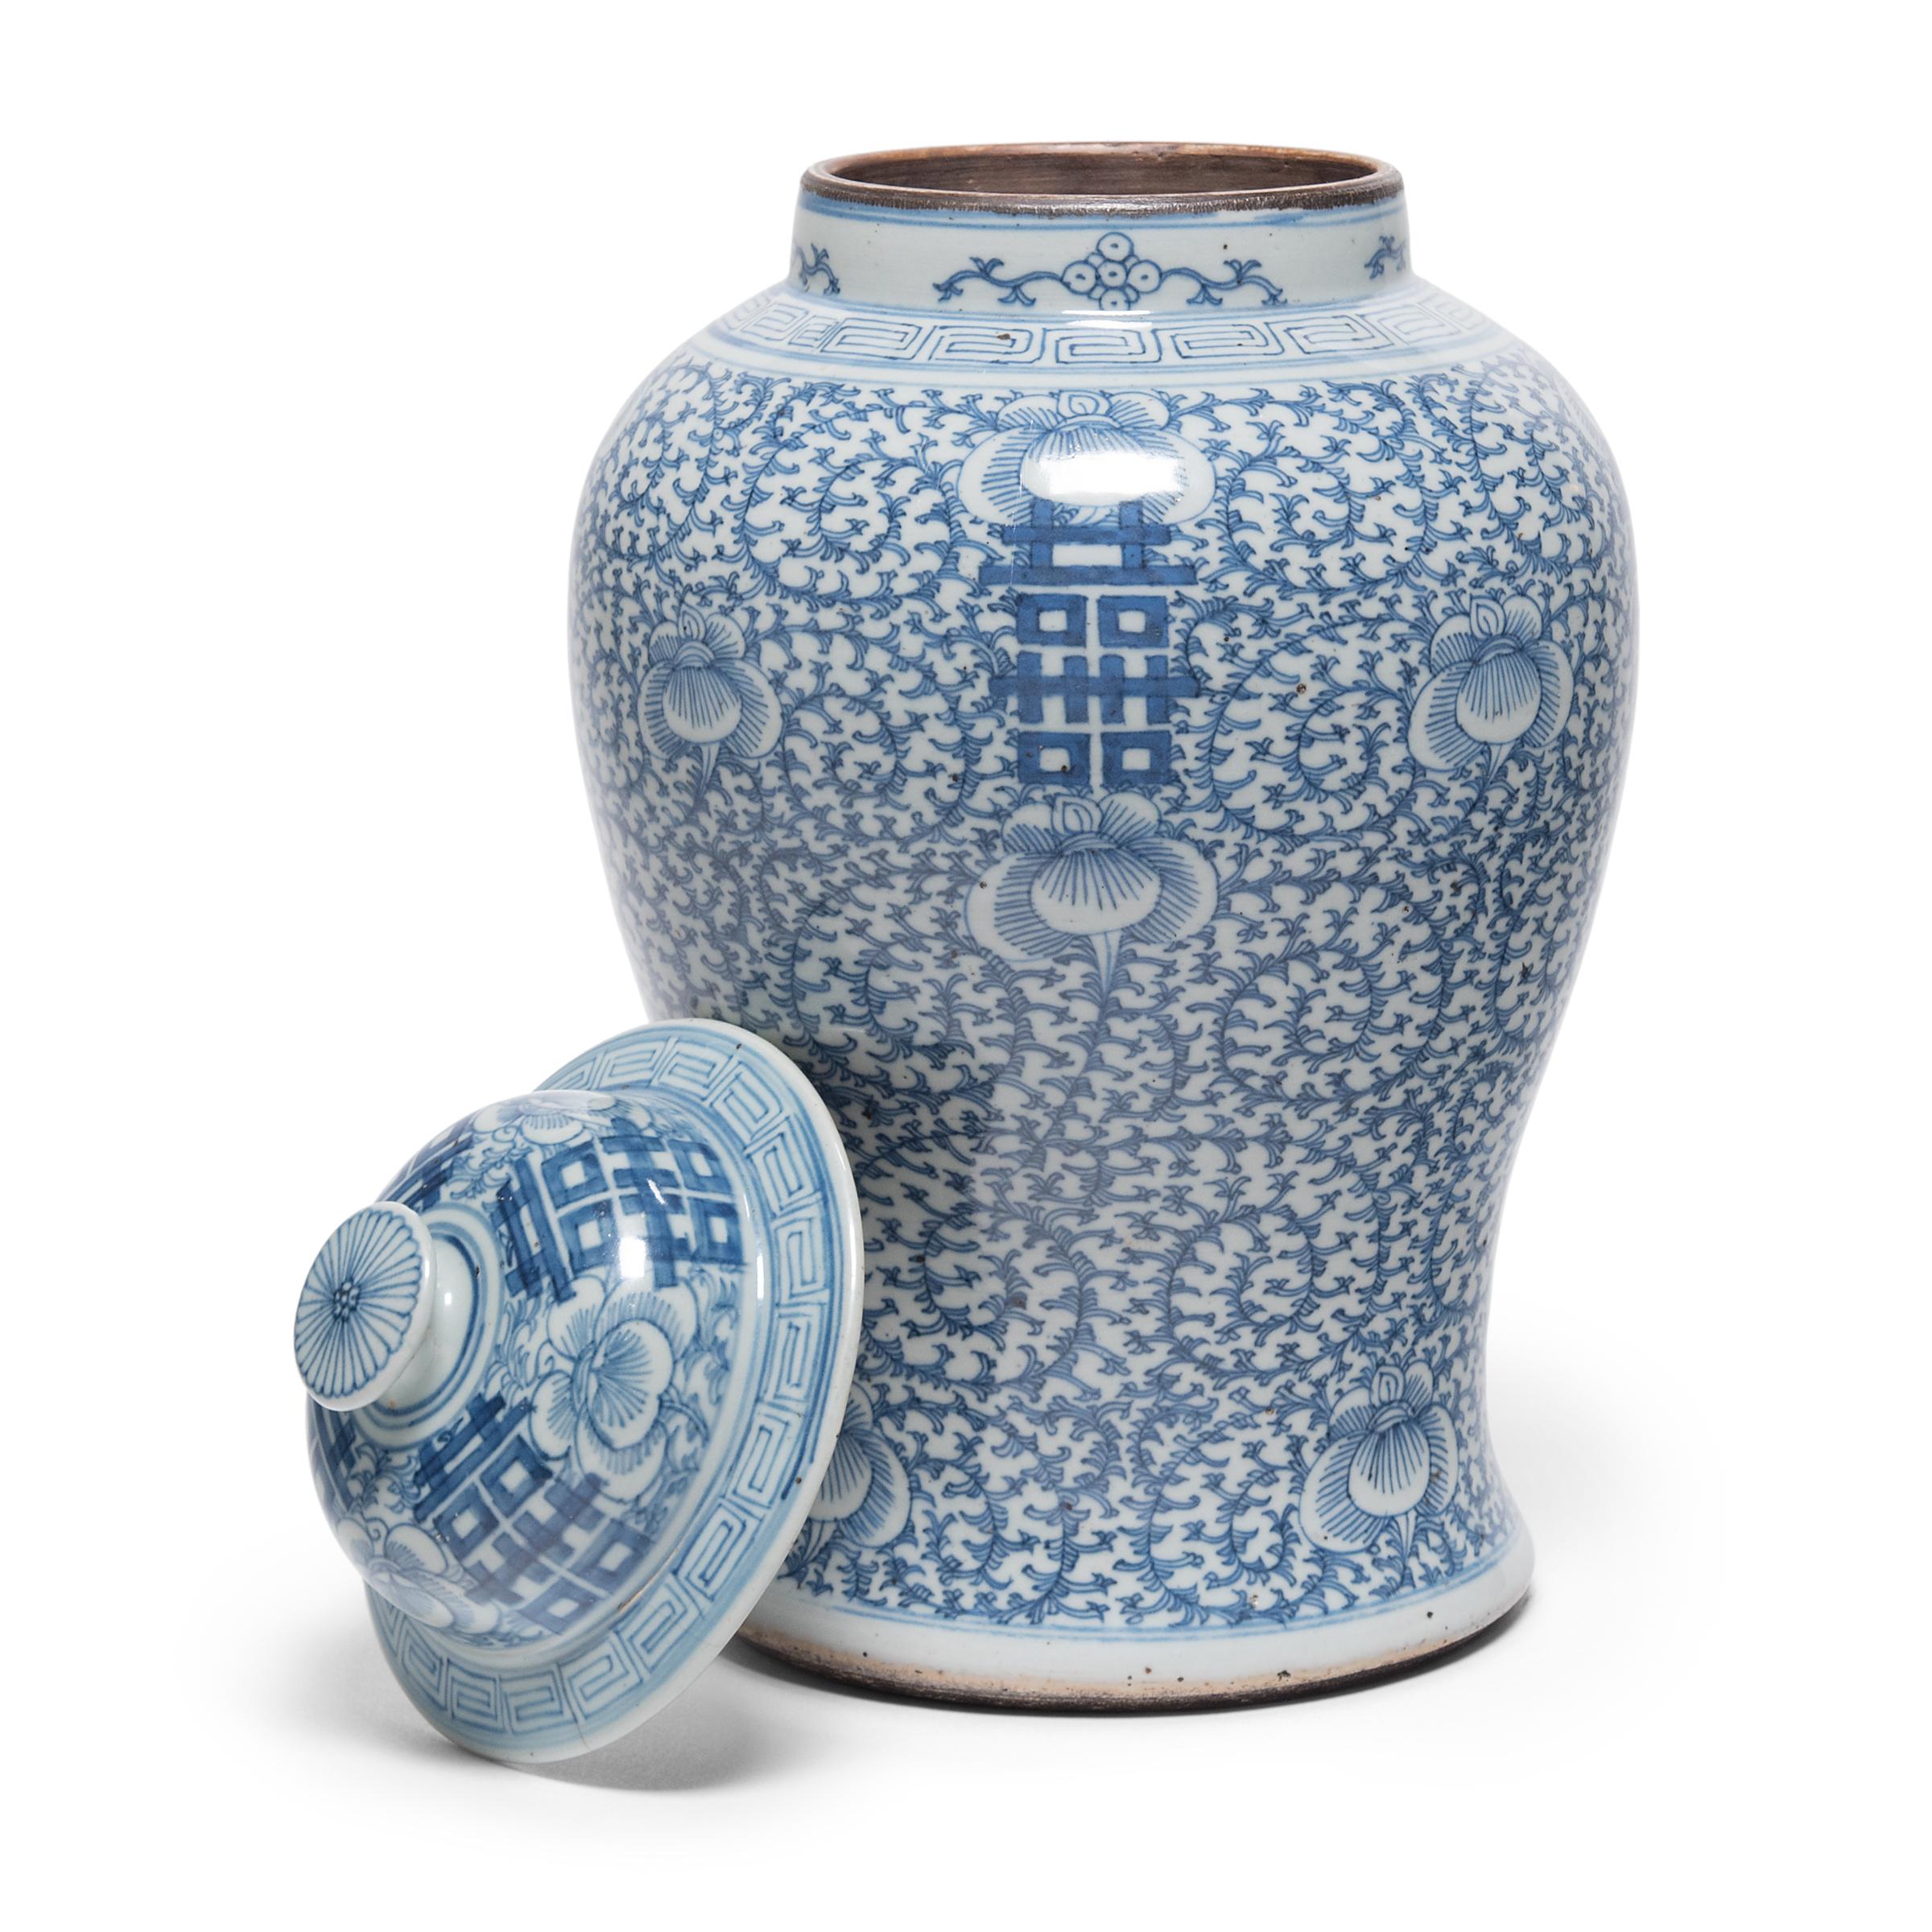 19th Century Chinese Blue and White Double Happiness Ginger Jar, circa 1850